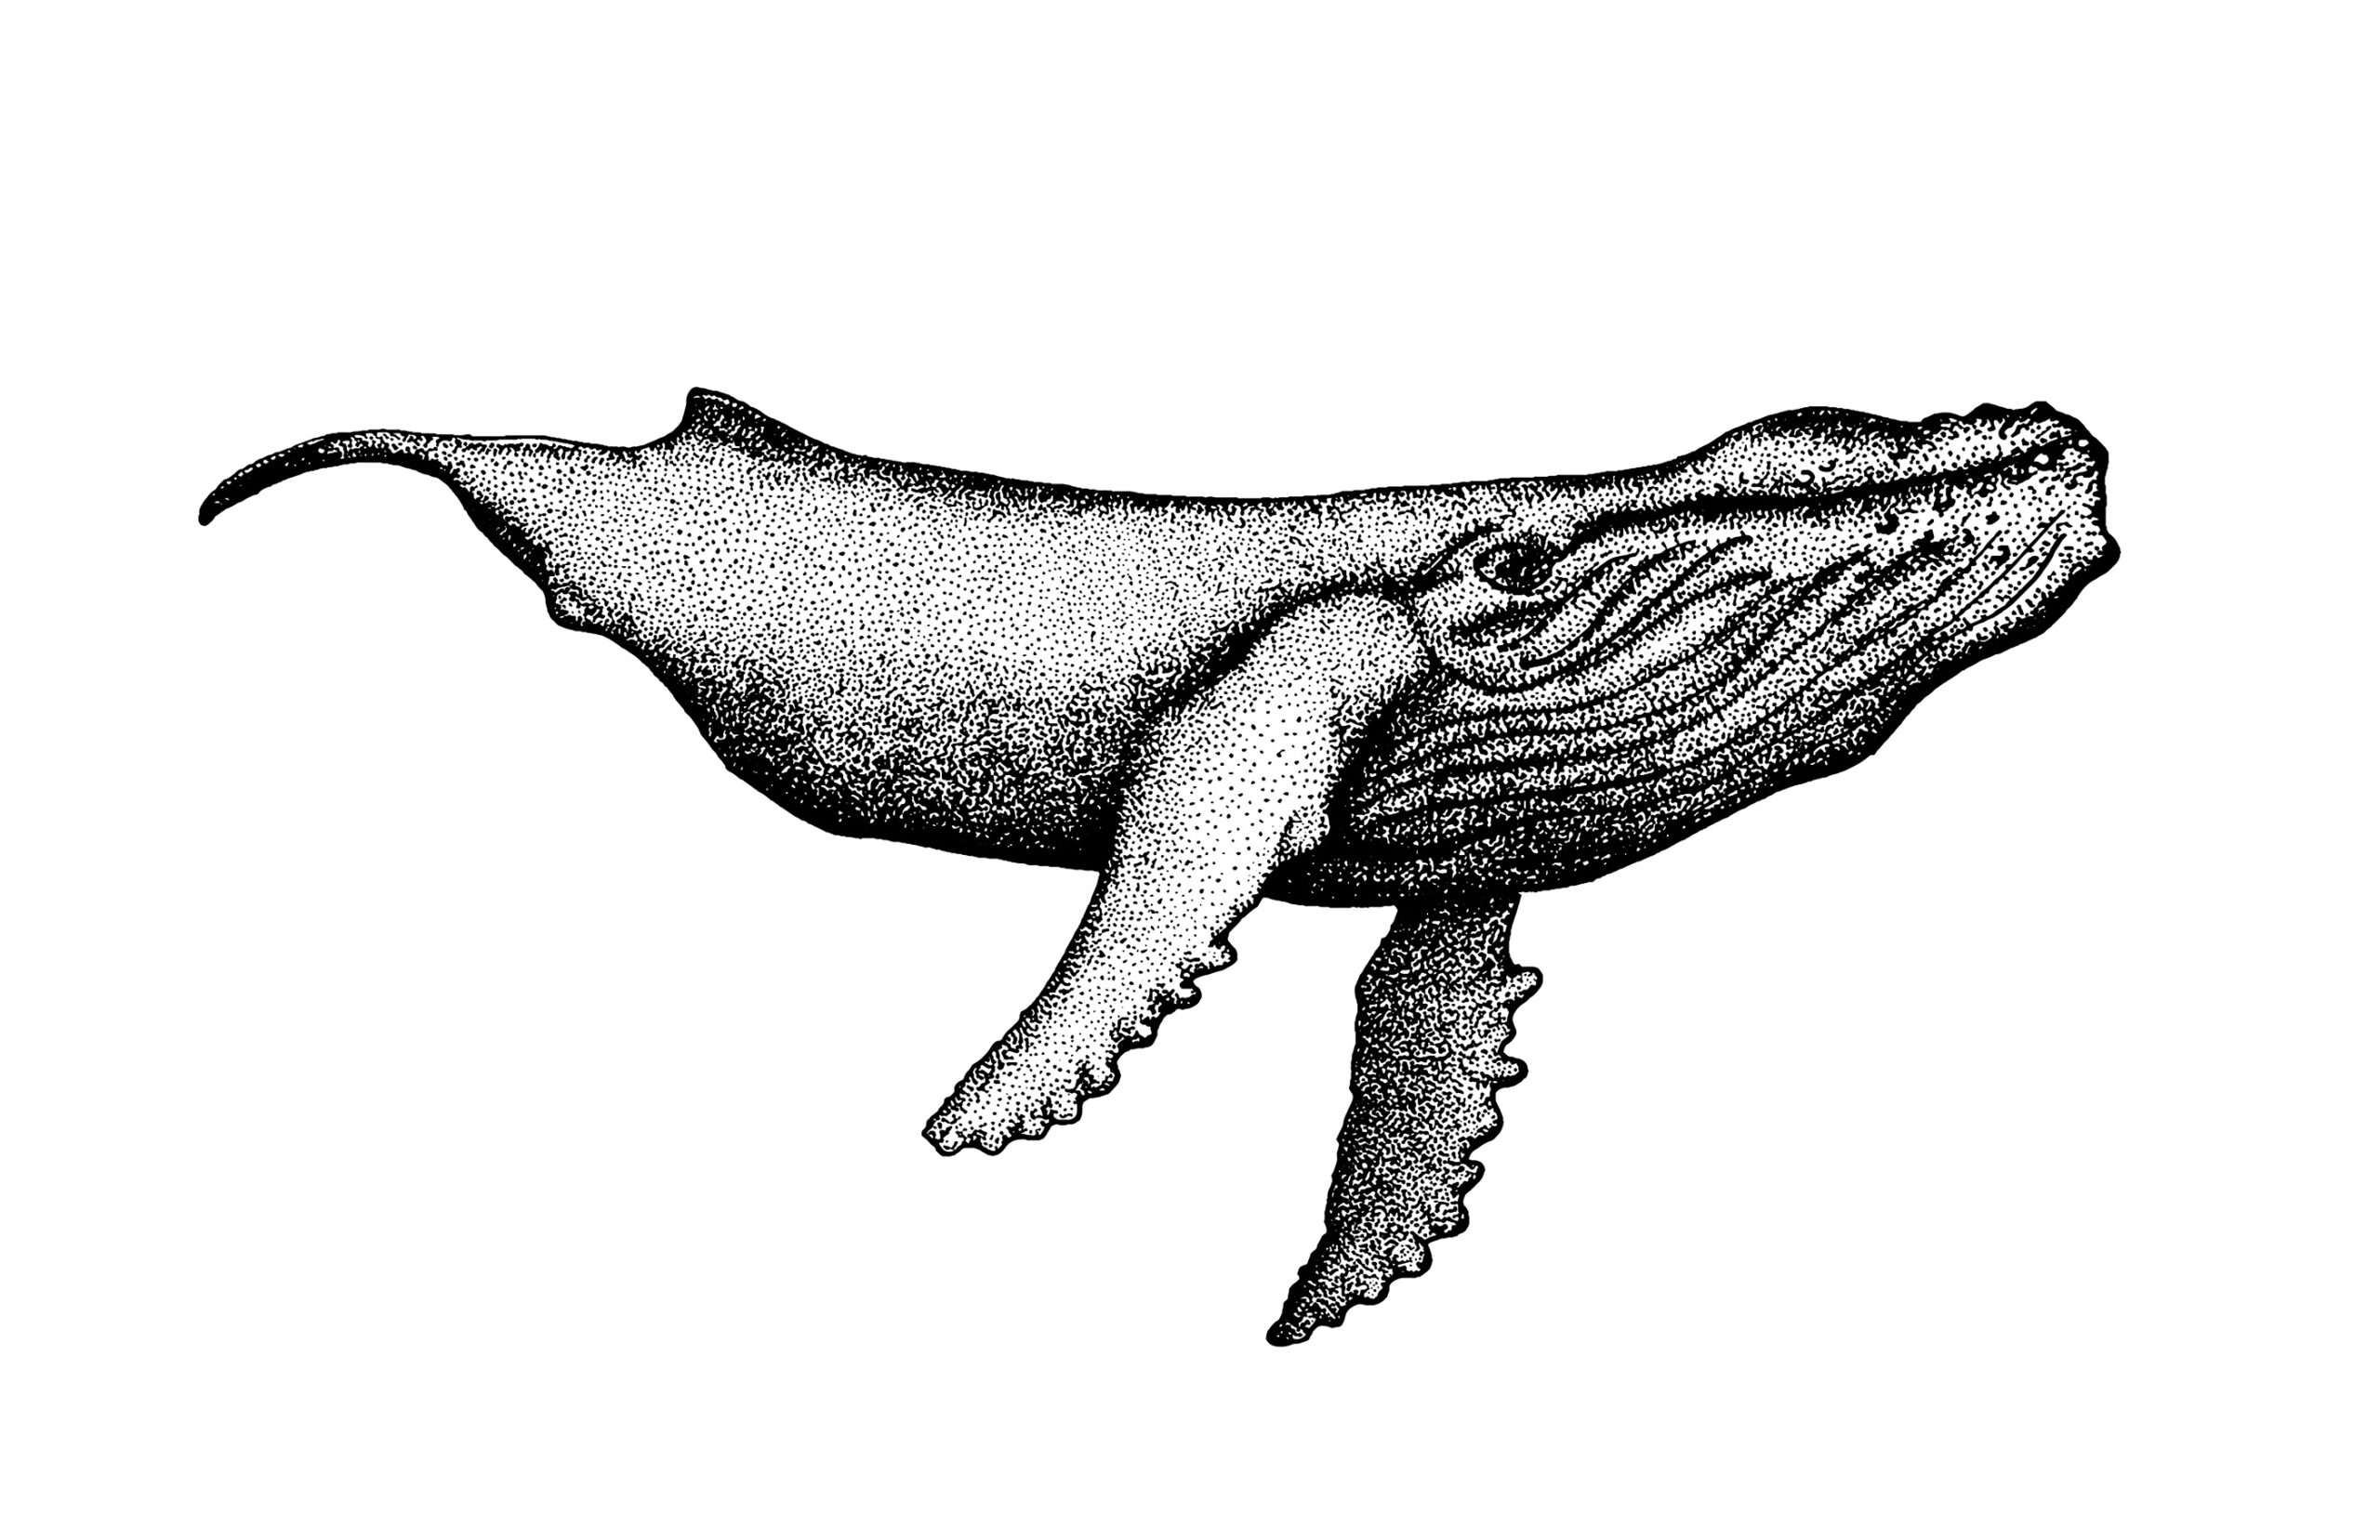 A pointillistic drawing of a humpback whale